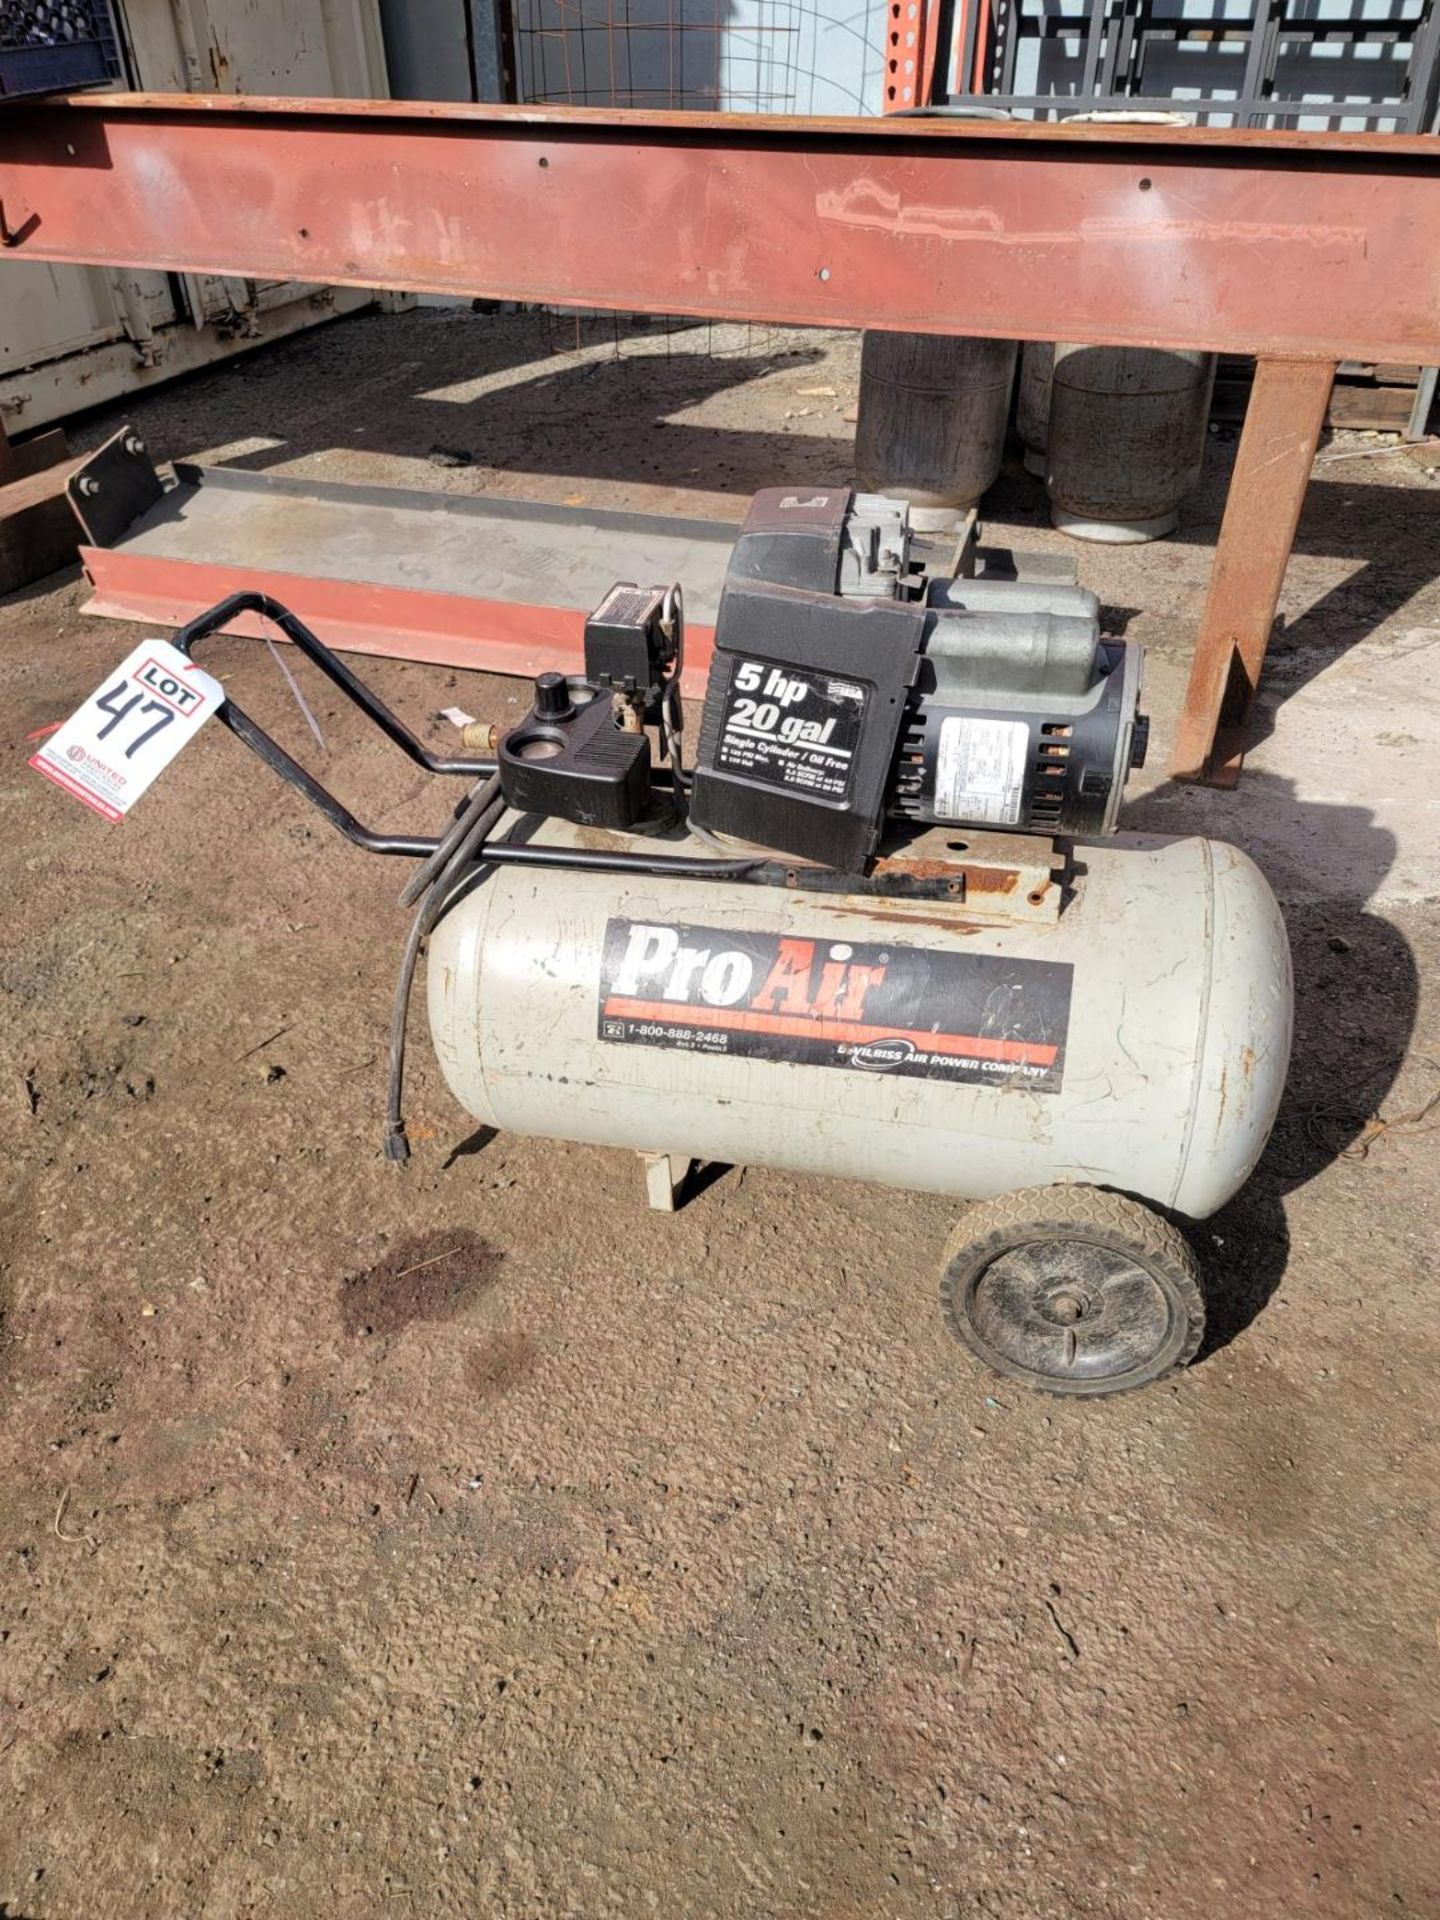 PRO AIR (by DeVilbiss) 5 HP PORTABLE AIR COMPRESSOR, 20 GAL TANK, MODEL PRF-5020-WK, 119 CFM, 125 PS